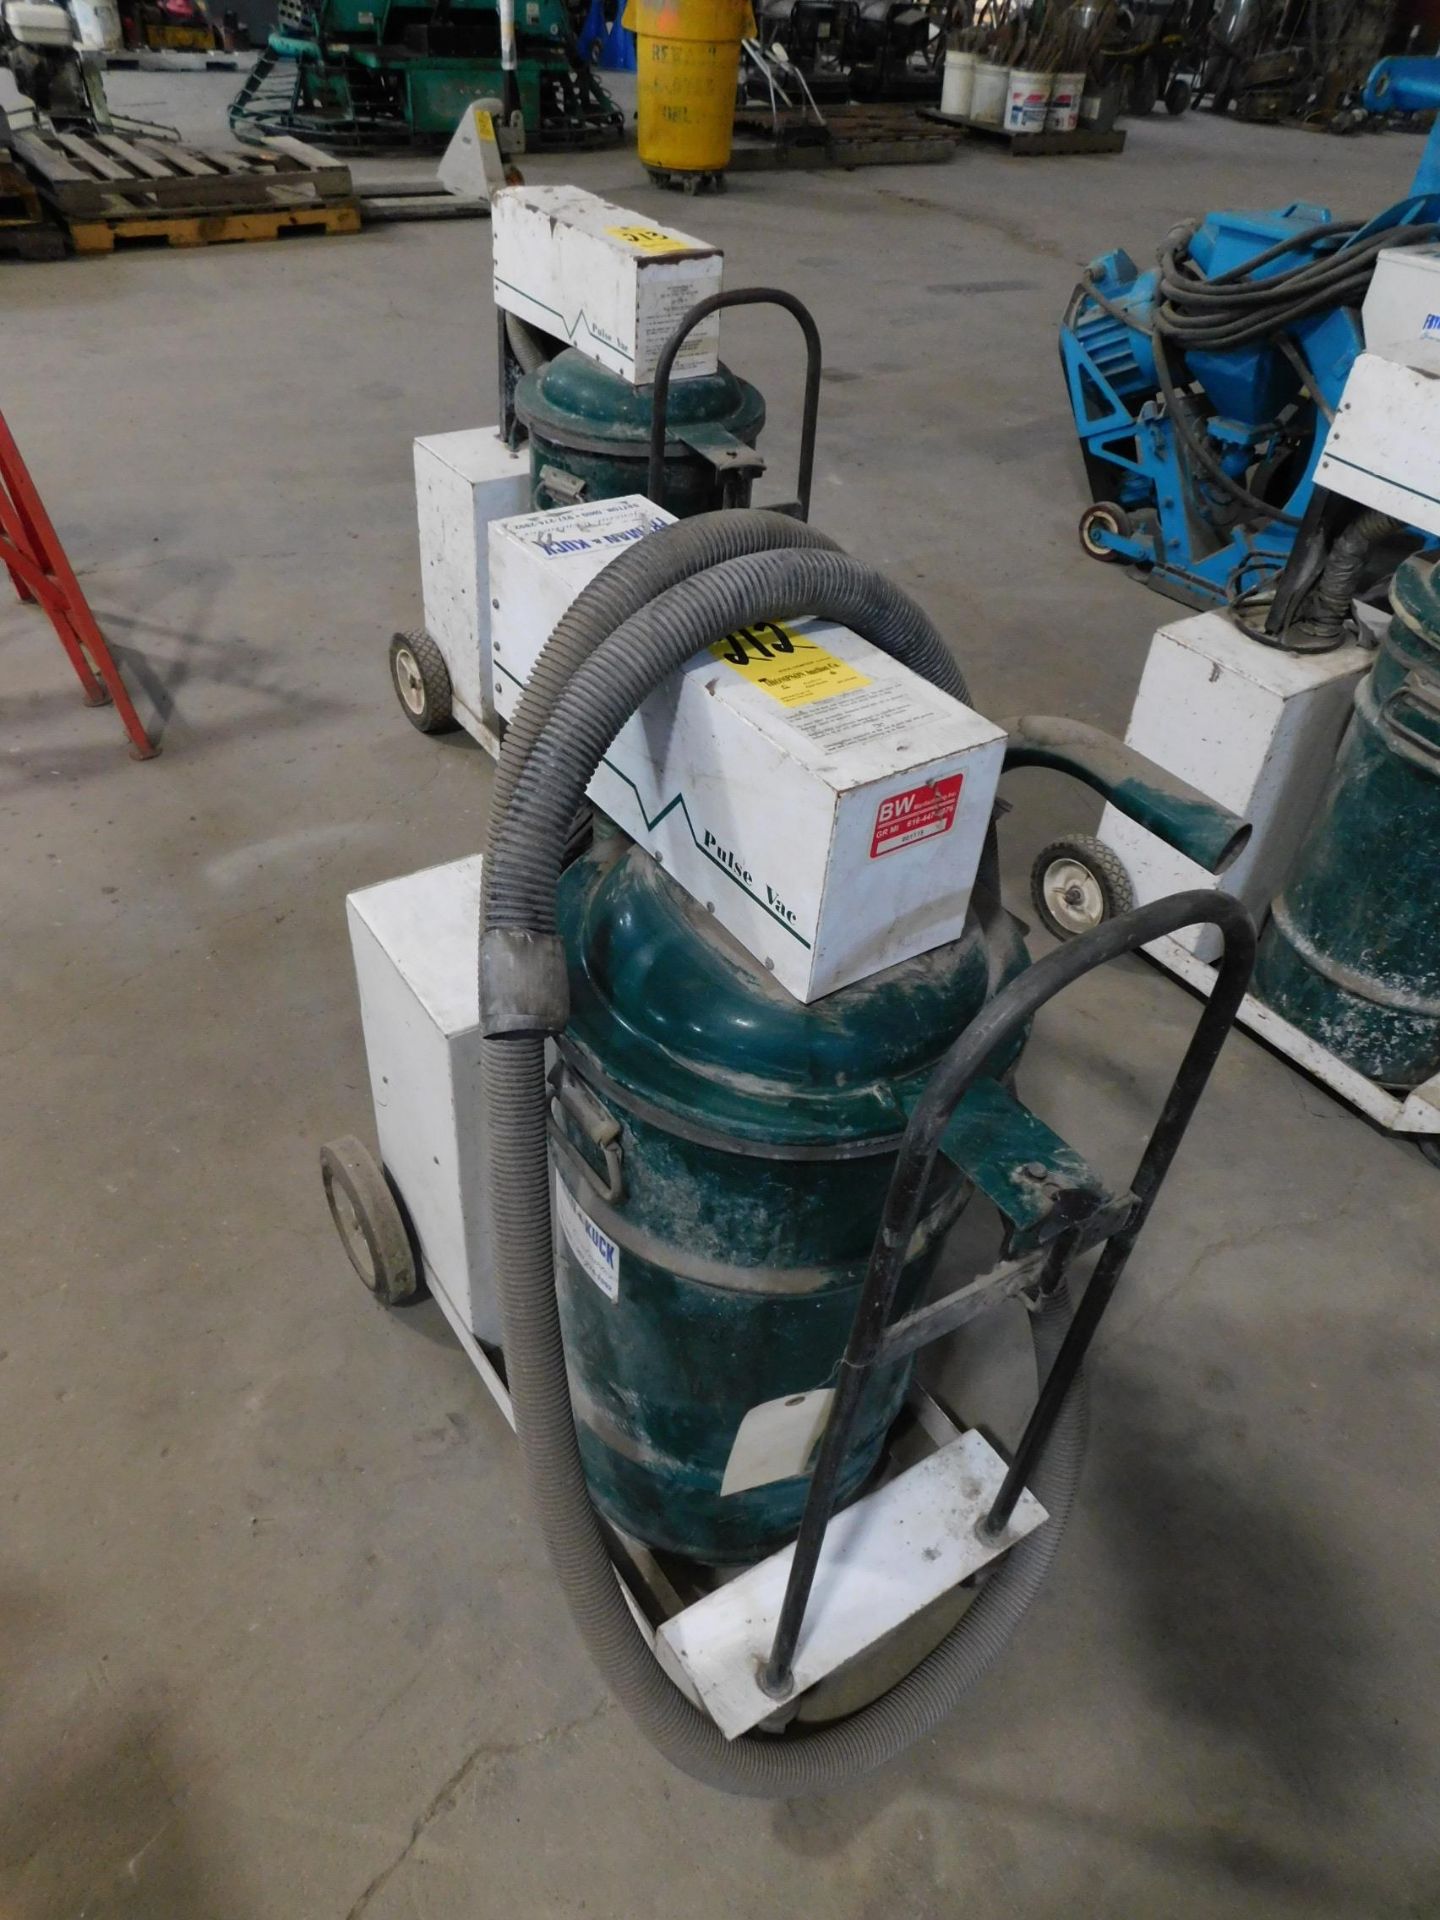 BW Mfg Pulse Vac Dust Containment System